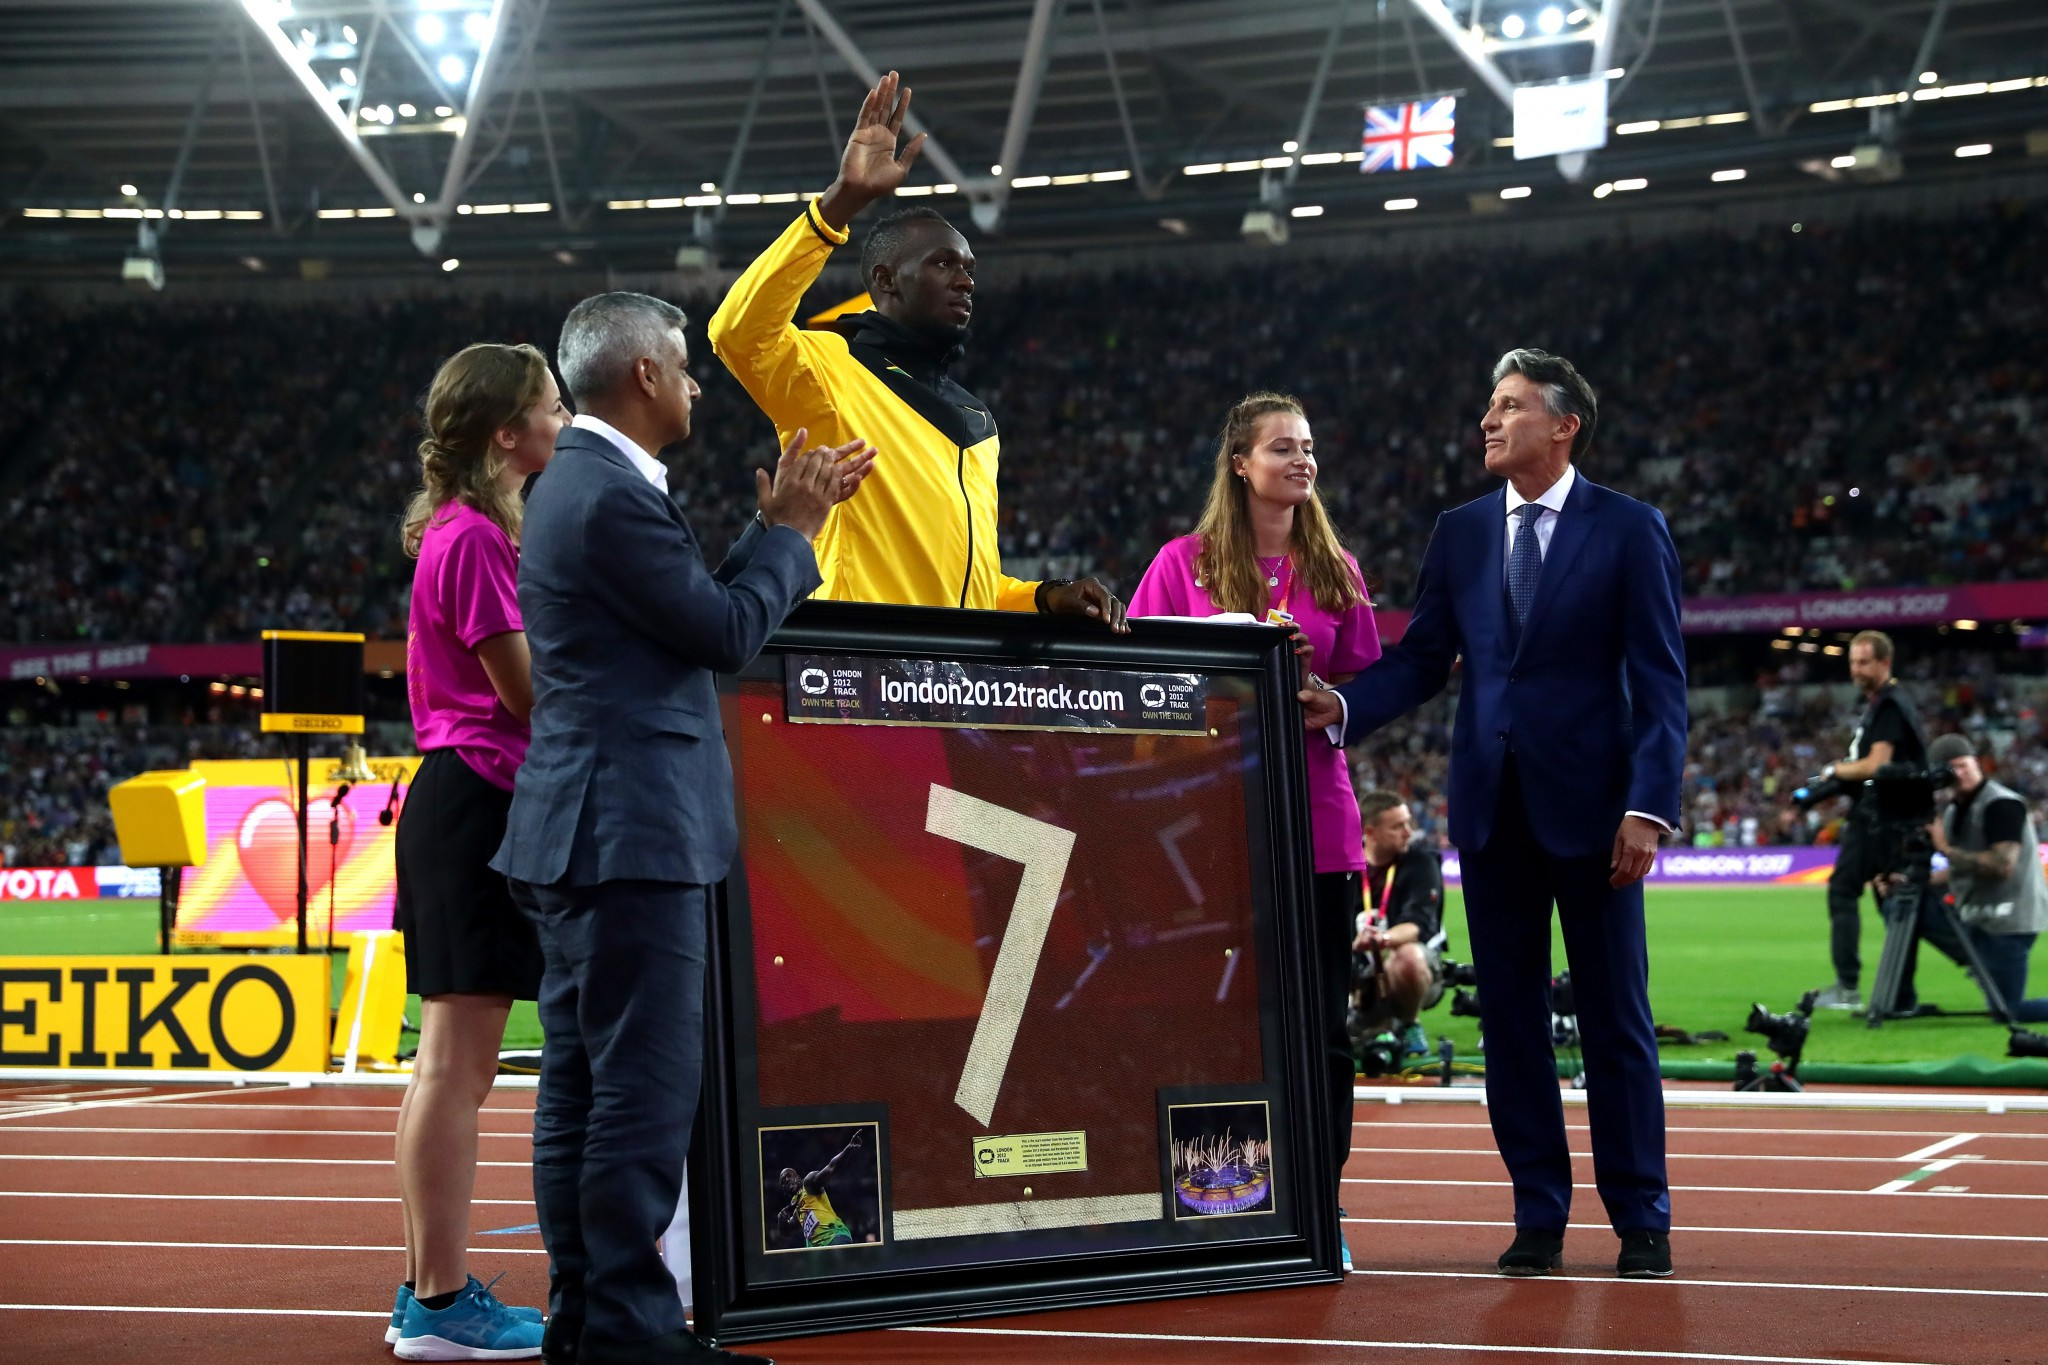 Usain Bolt was presented with a portion of the London 2012 track during his lap of honour ©Getty Images